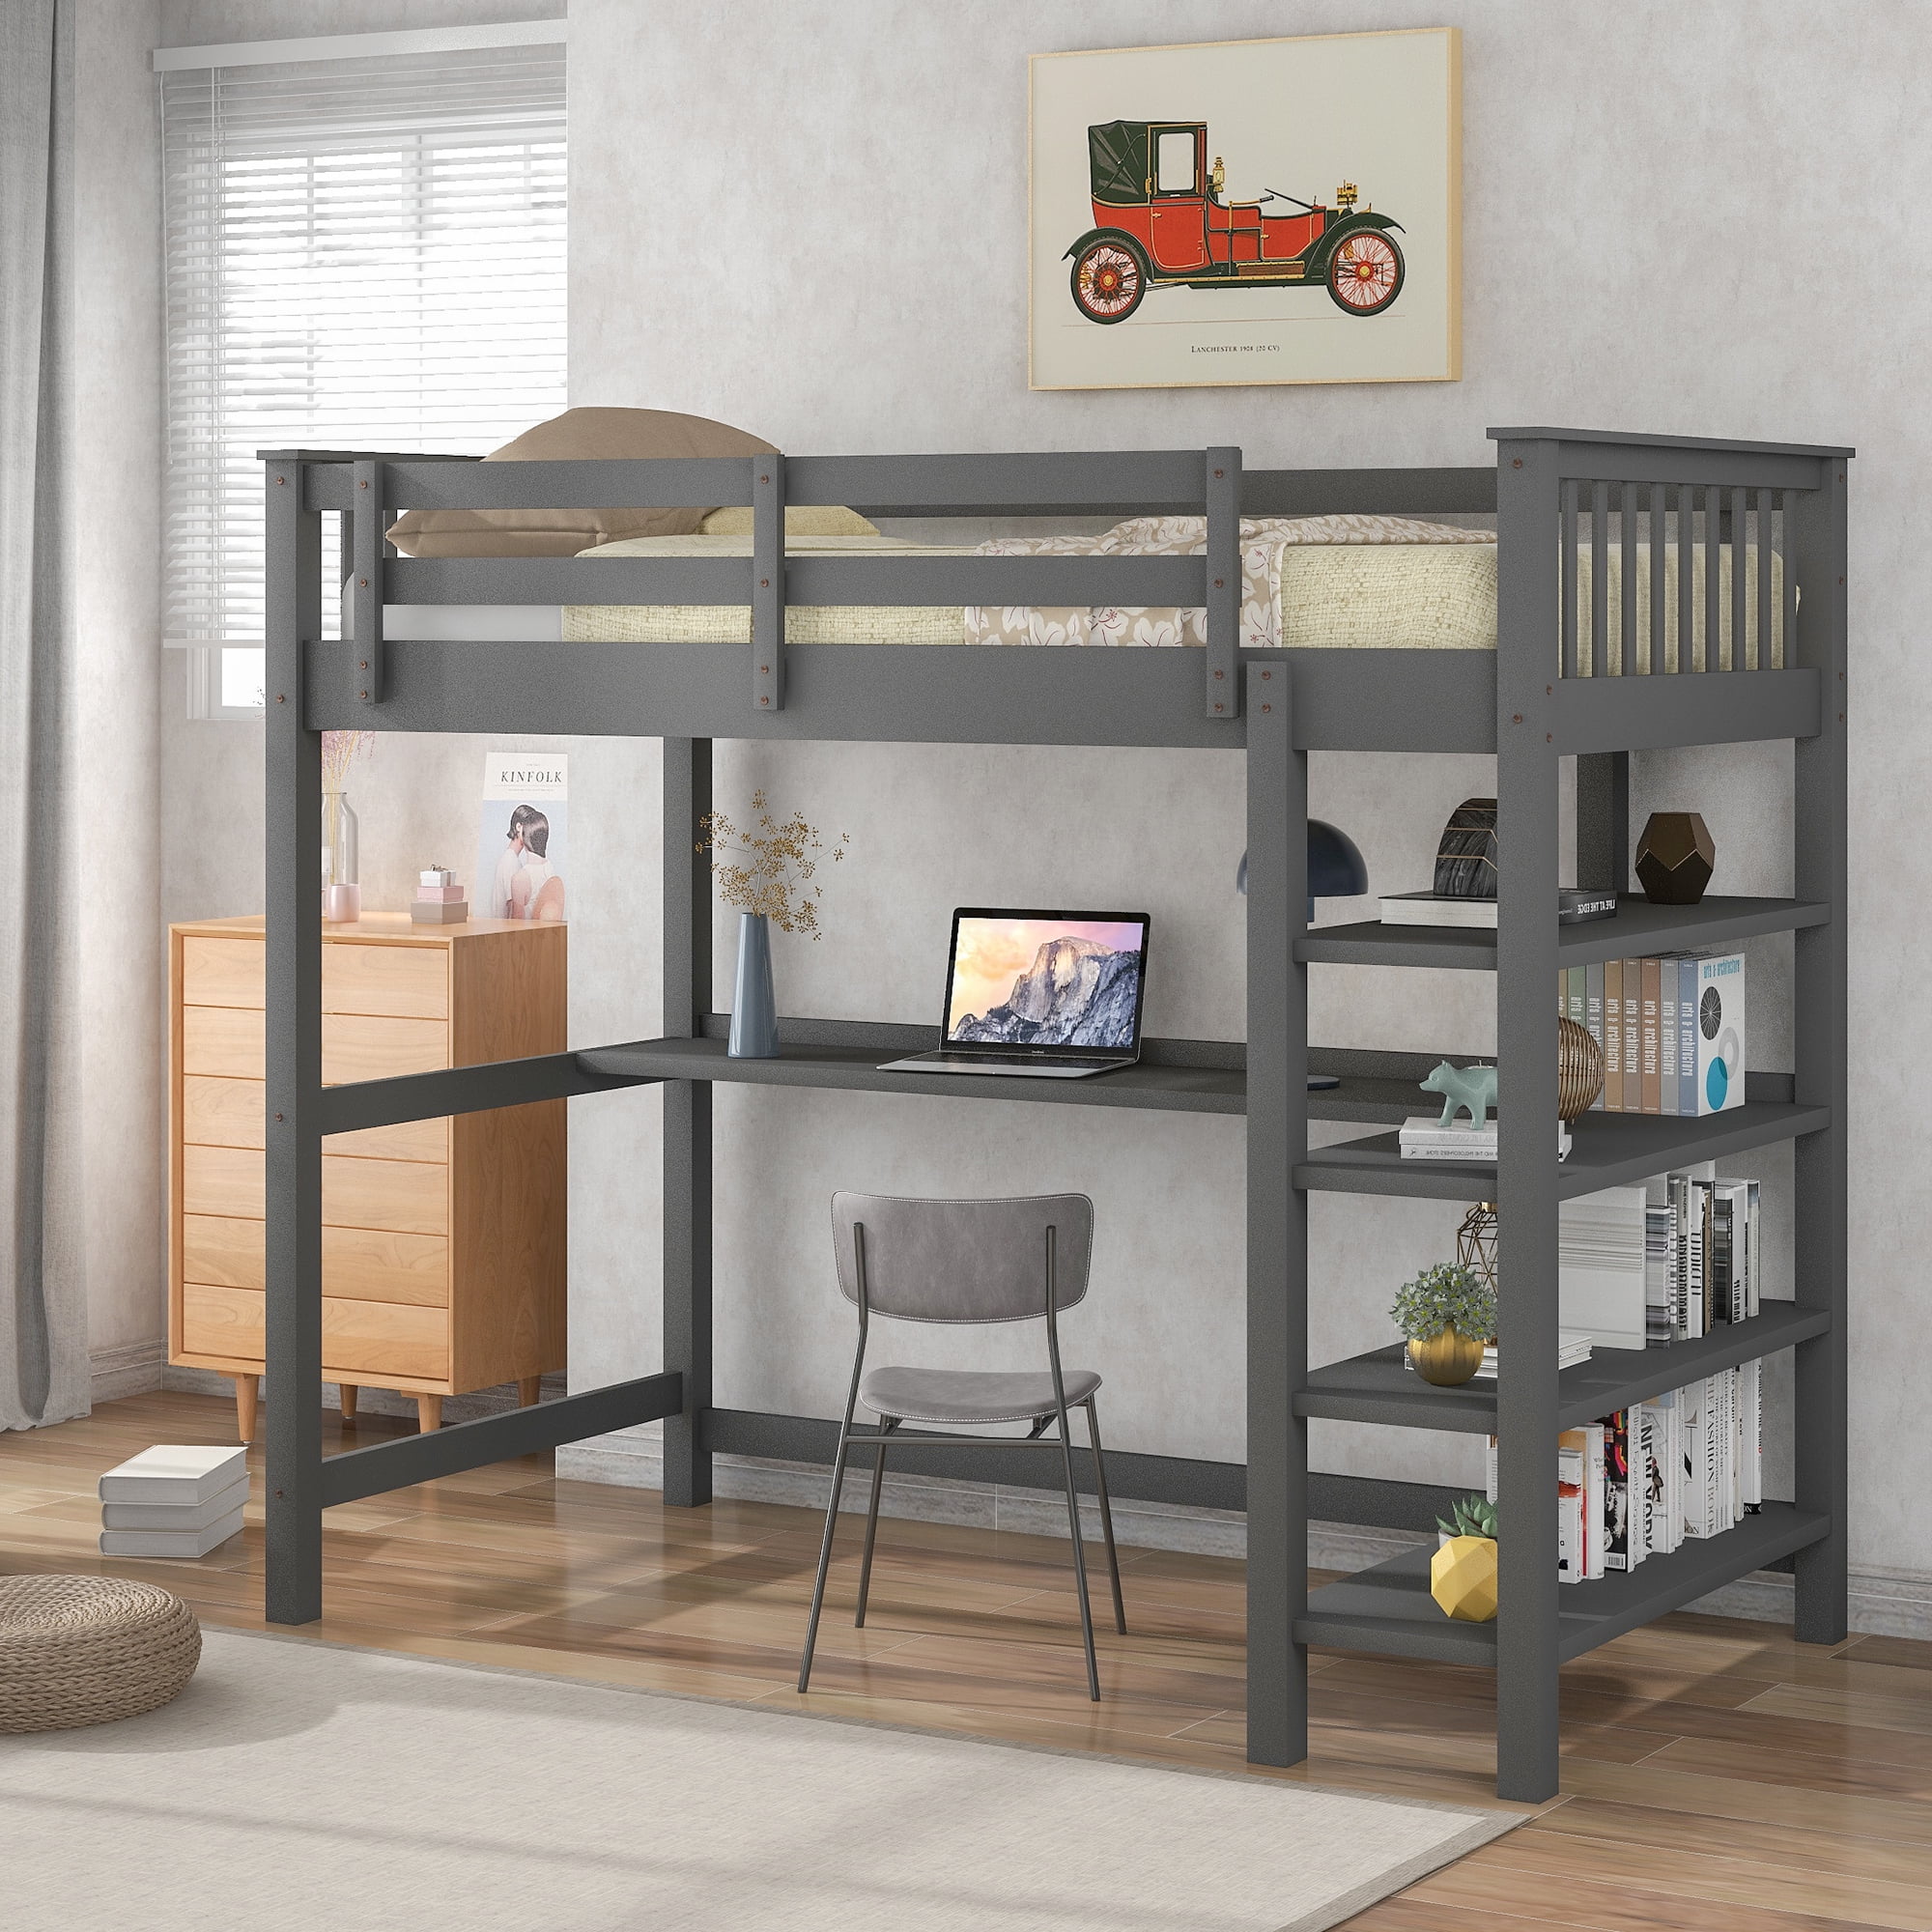 Euroco Wood Twin Size Loft Bed With, Twin Size Loft Bed With Desk And Storage